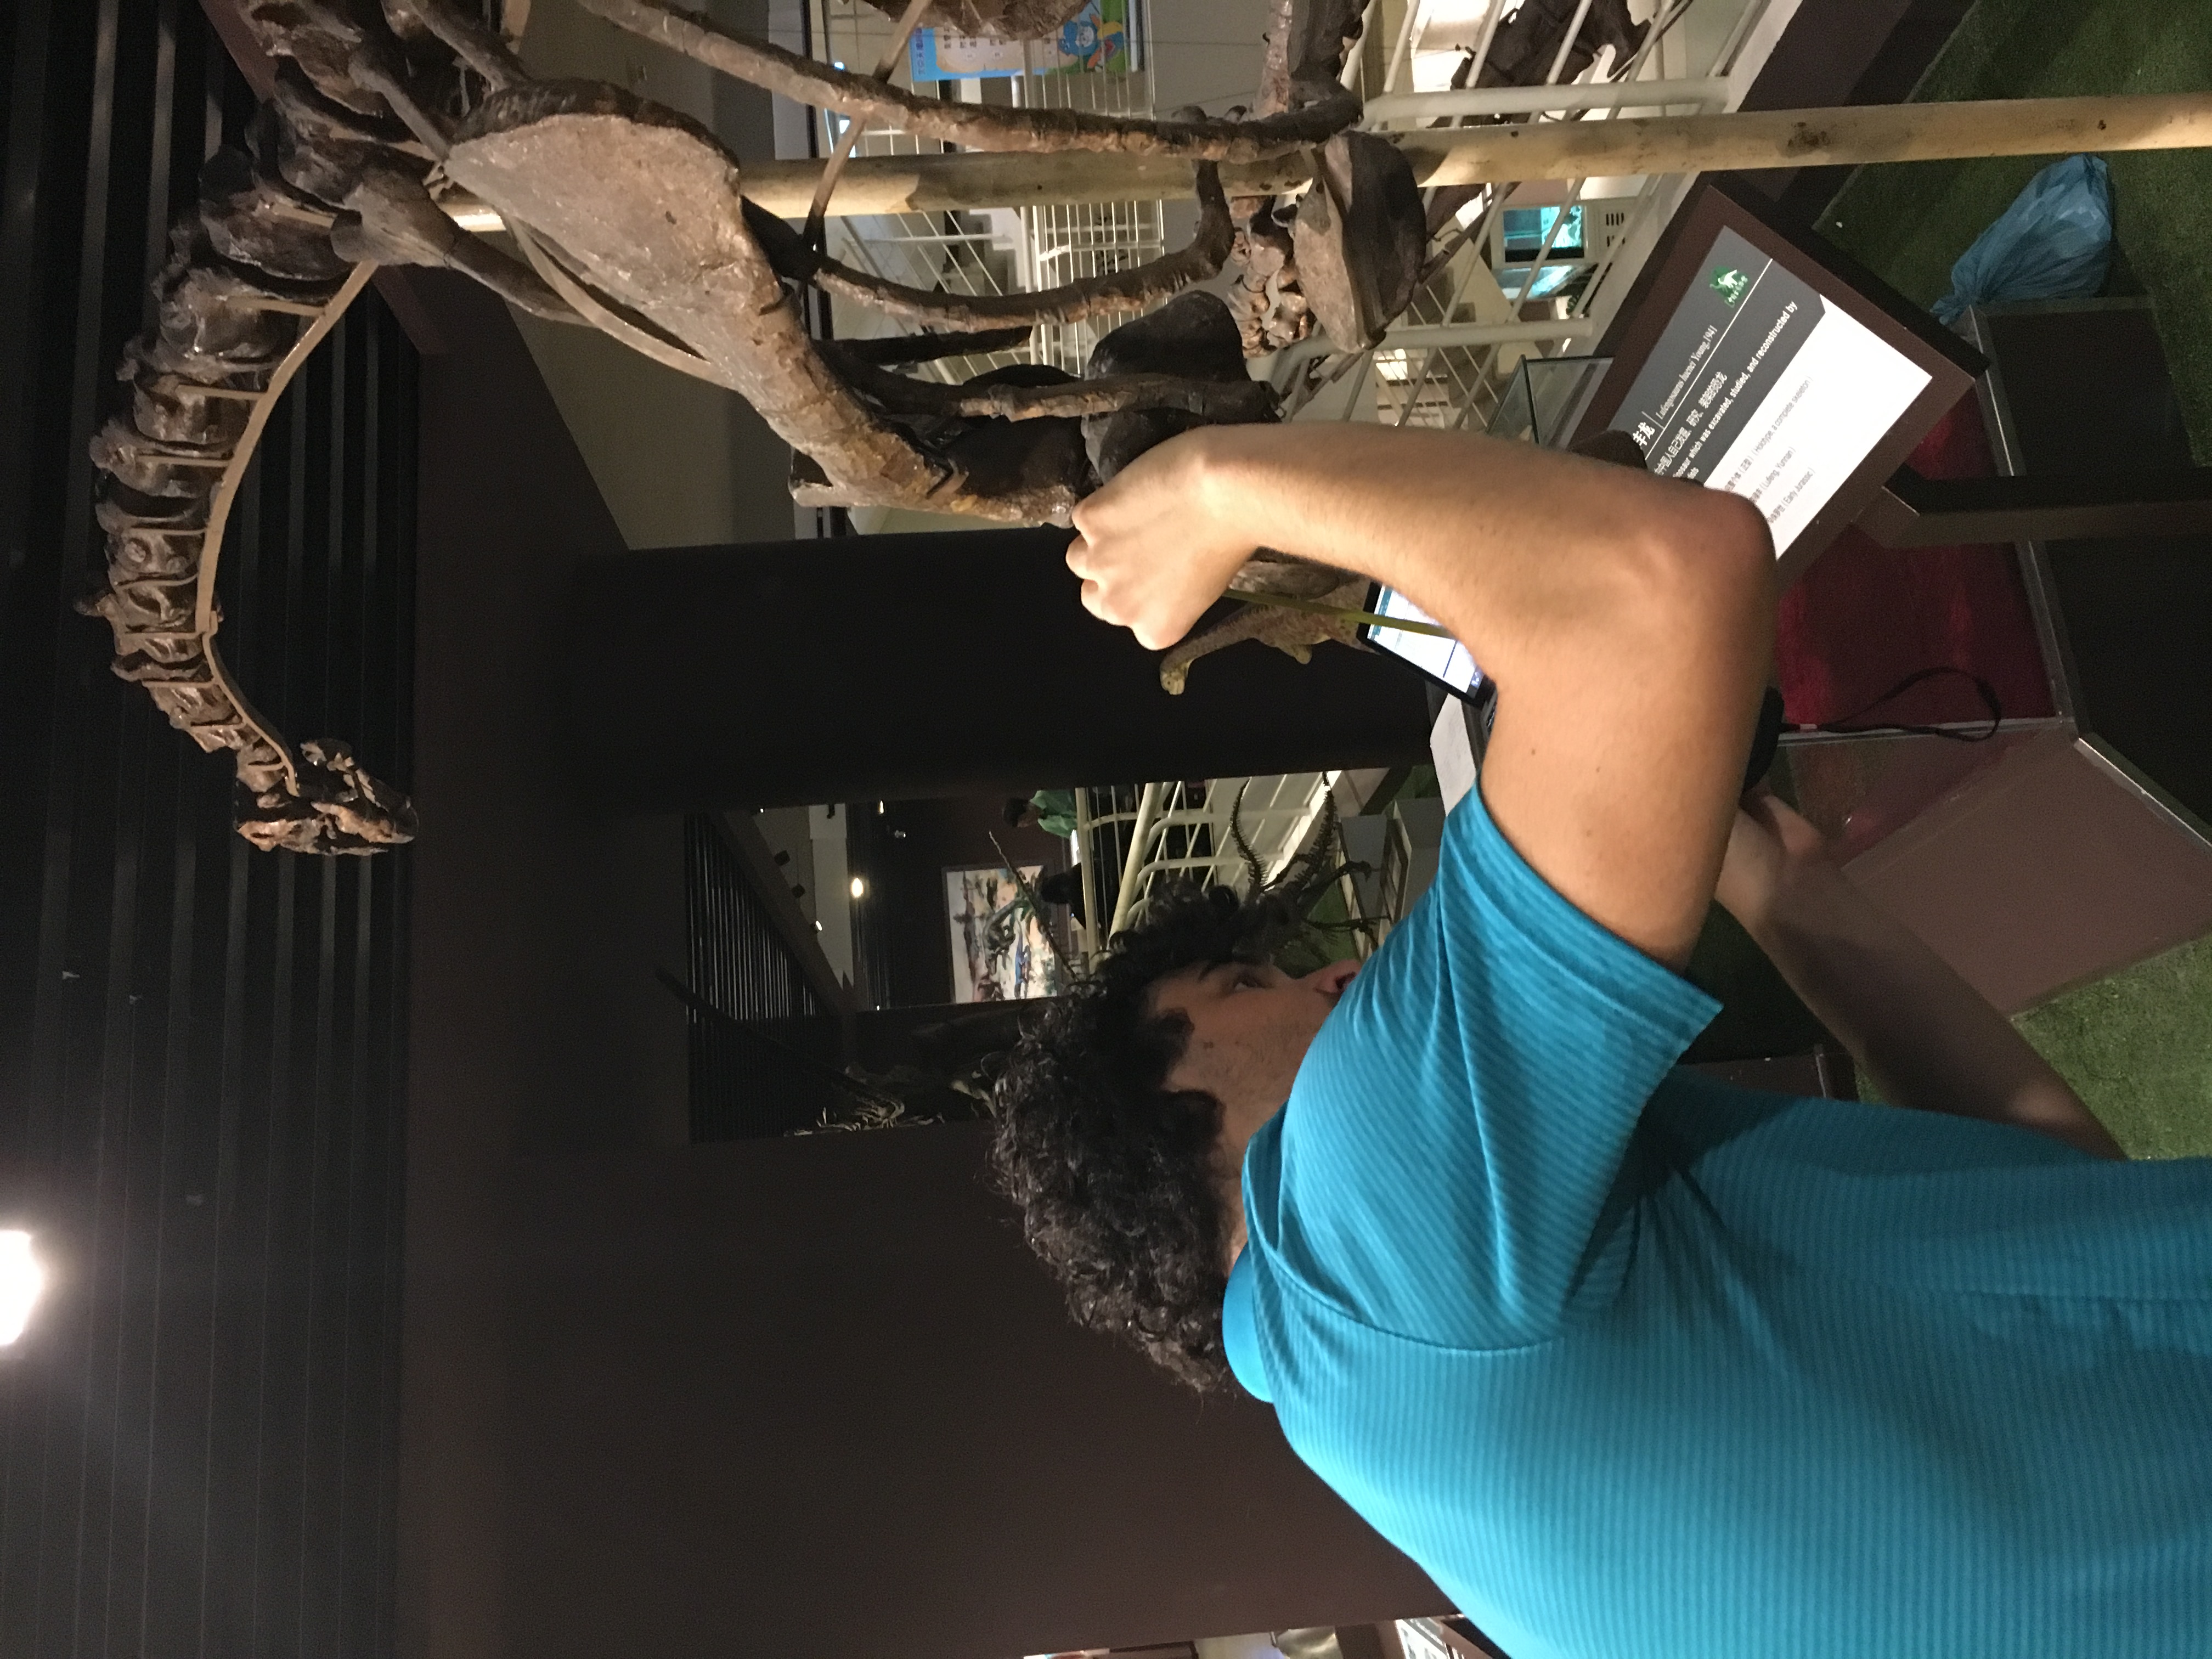 Measuring dinosaur fossils at the Institute of Vertebrate Paleontology and Paleoanthropology in Beijing, China